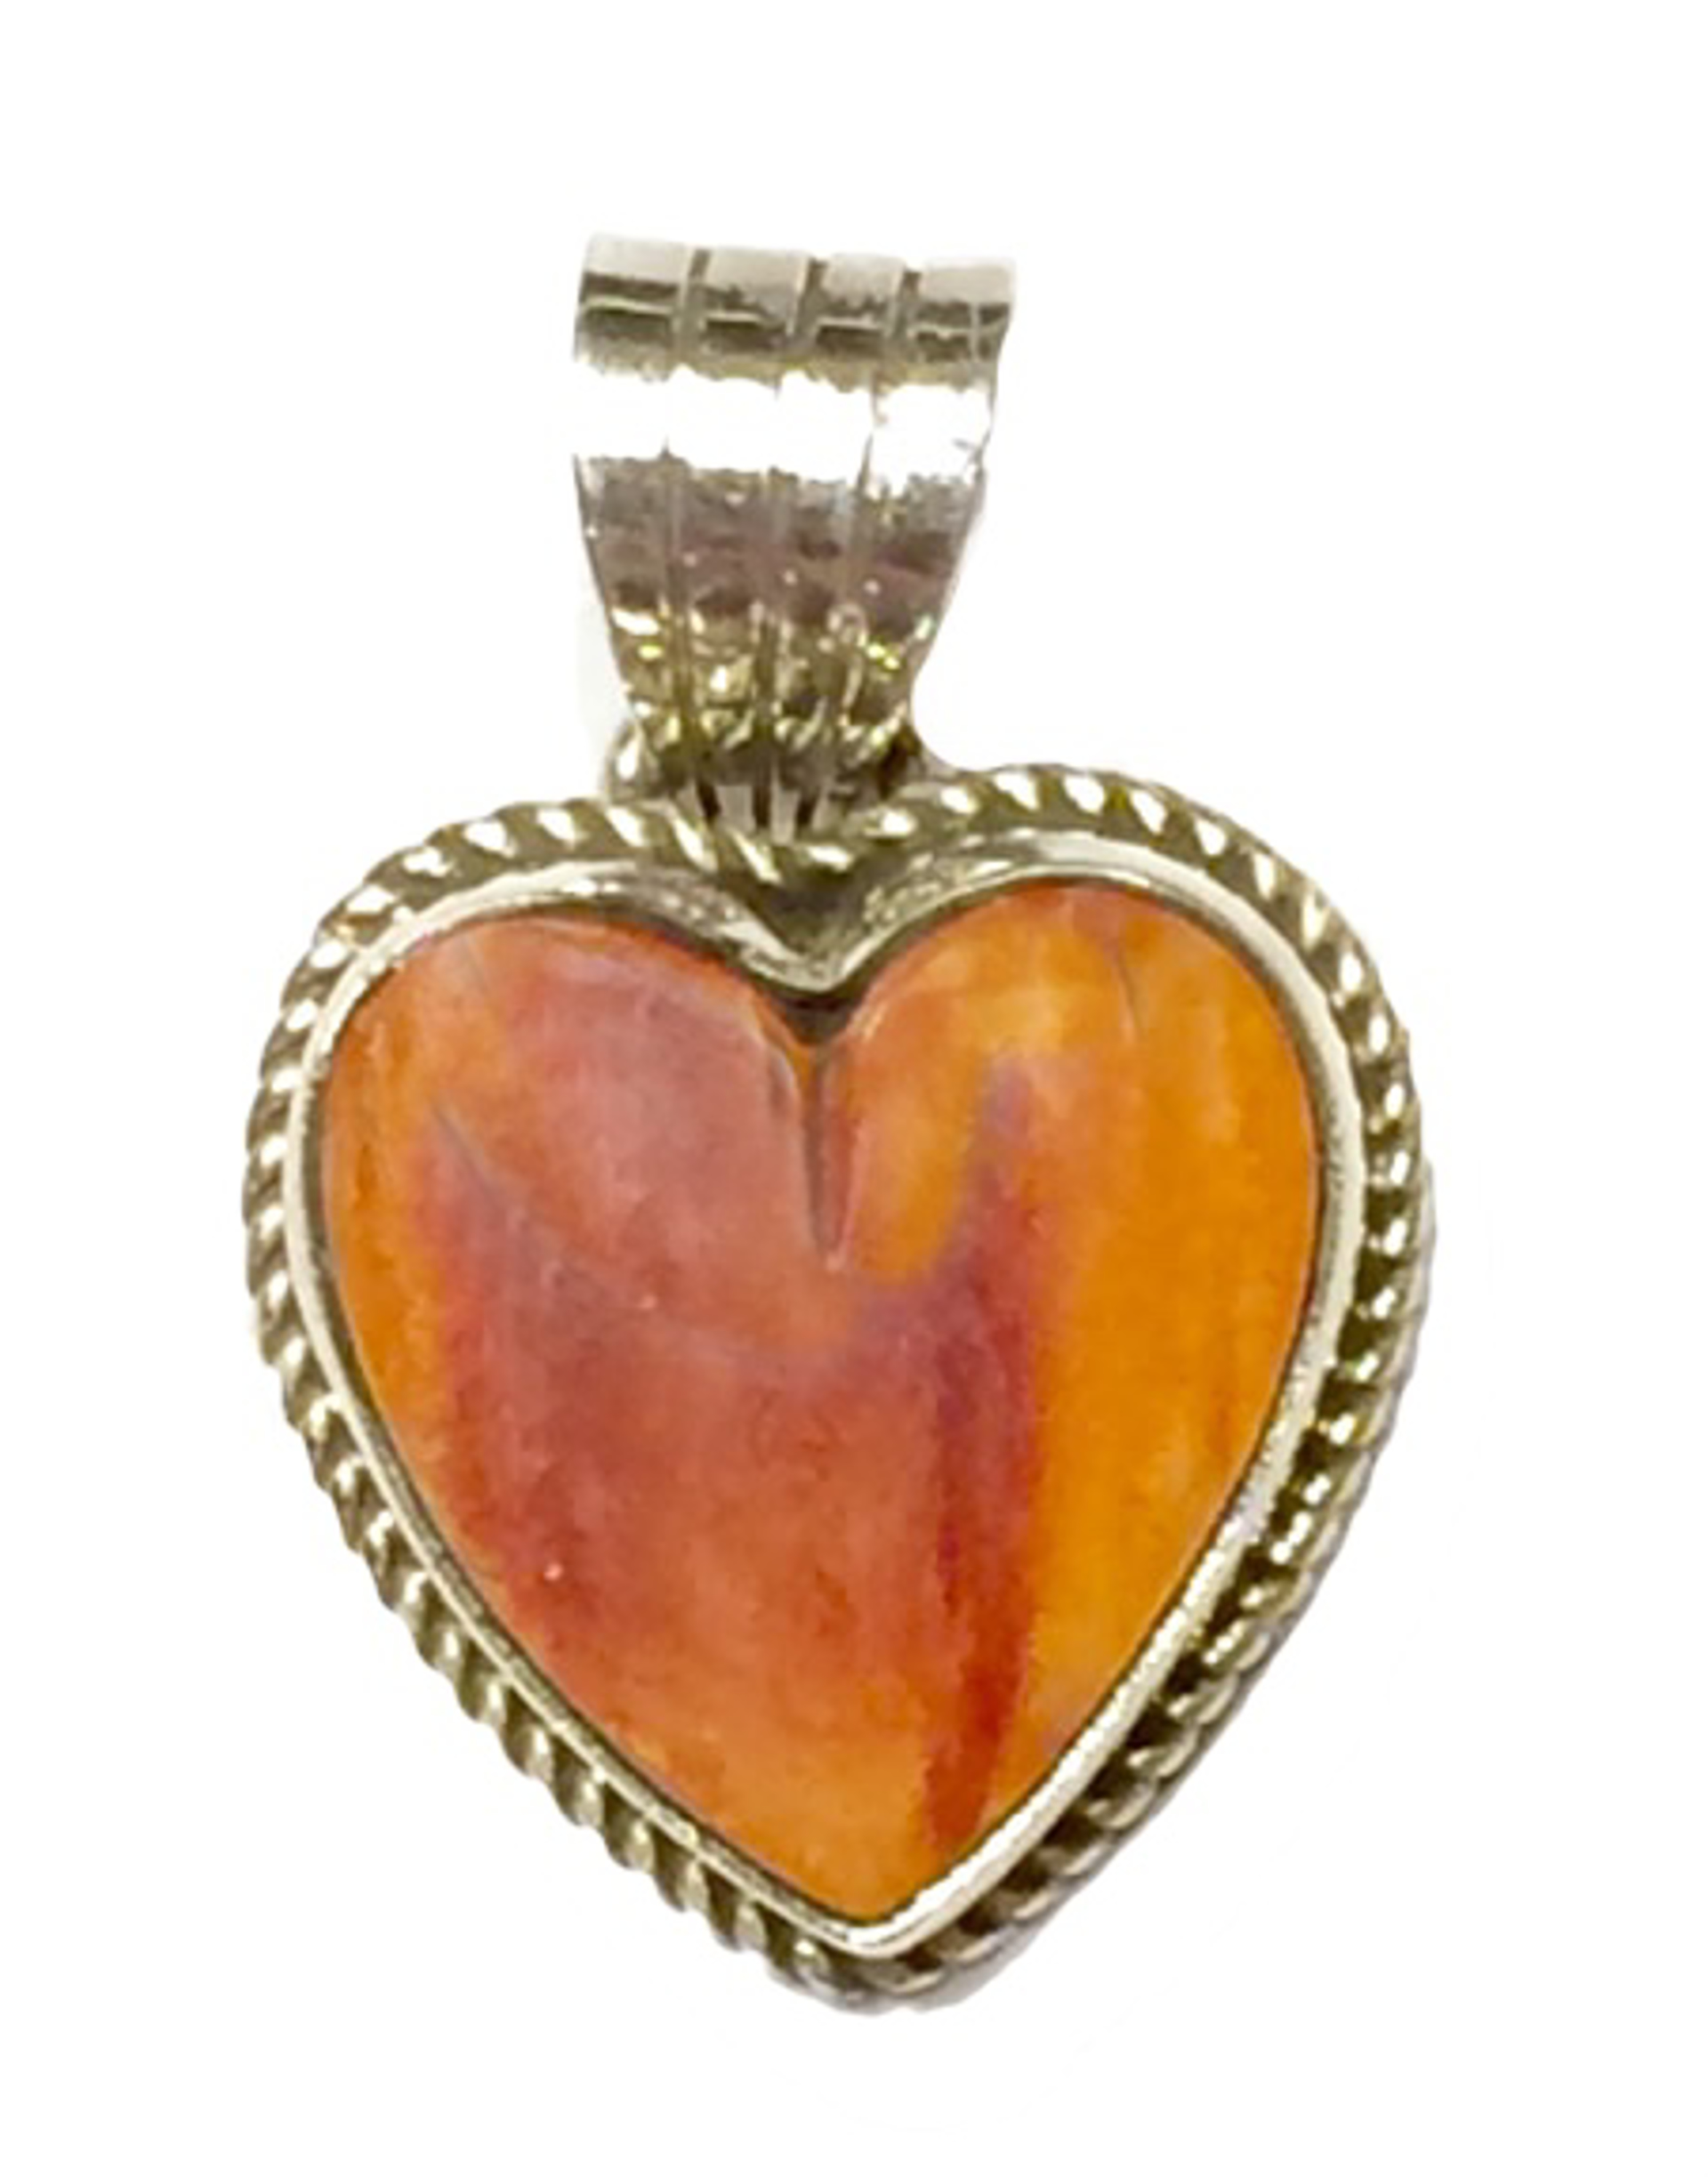 Pendant - Small Spiny Oyster Heart by Dan Dodson